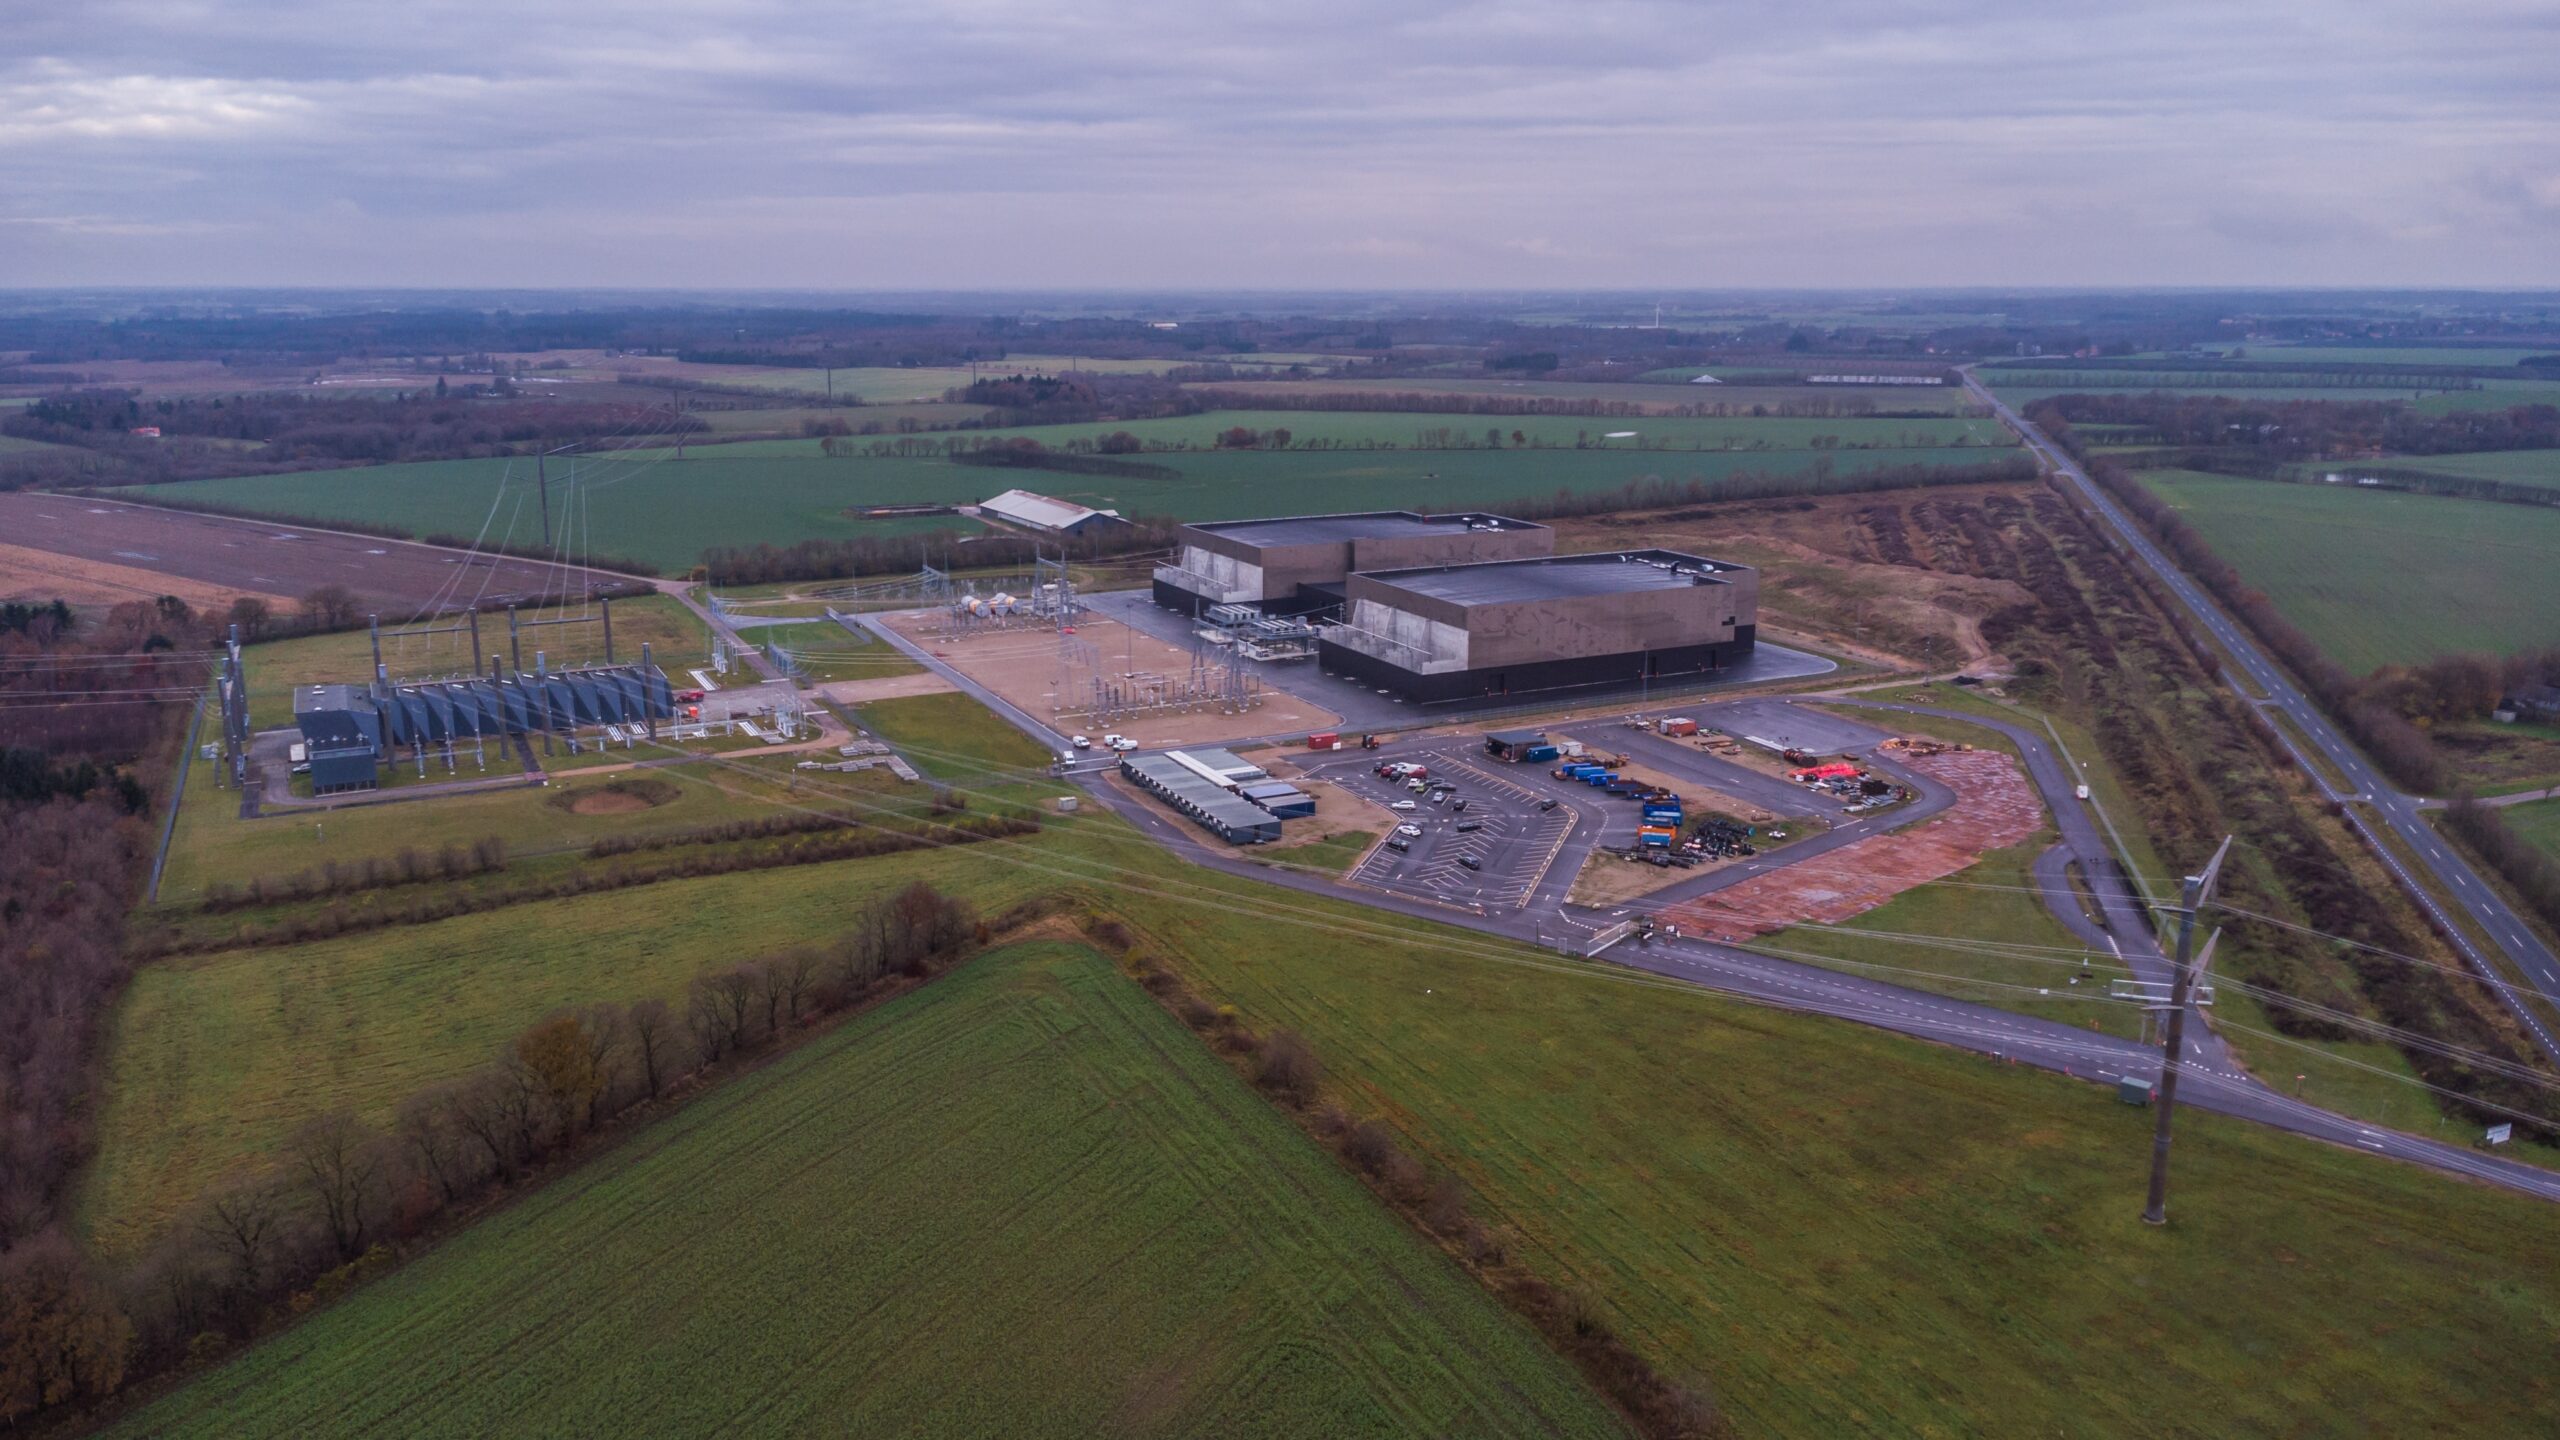 The growth of GB’s interconnector capacity